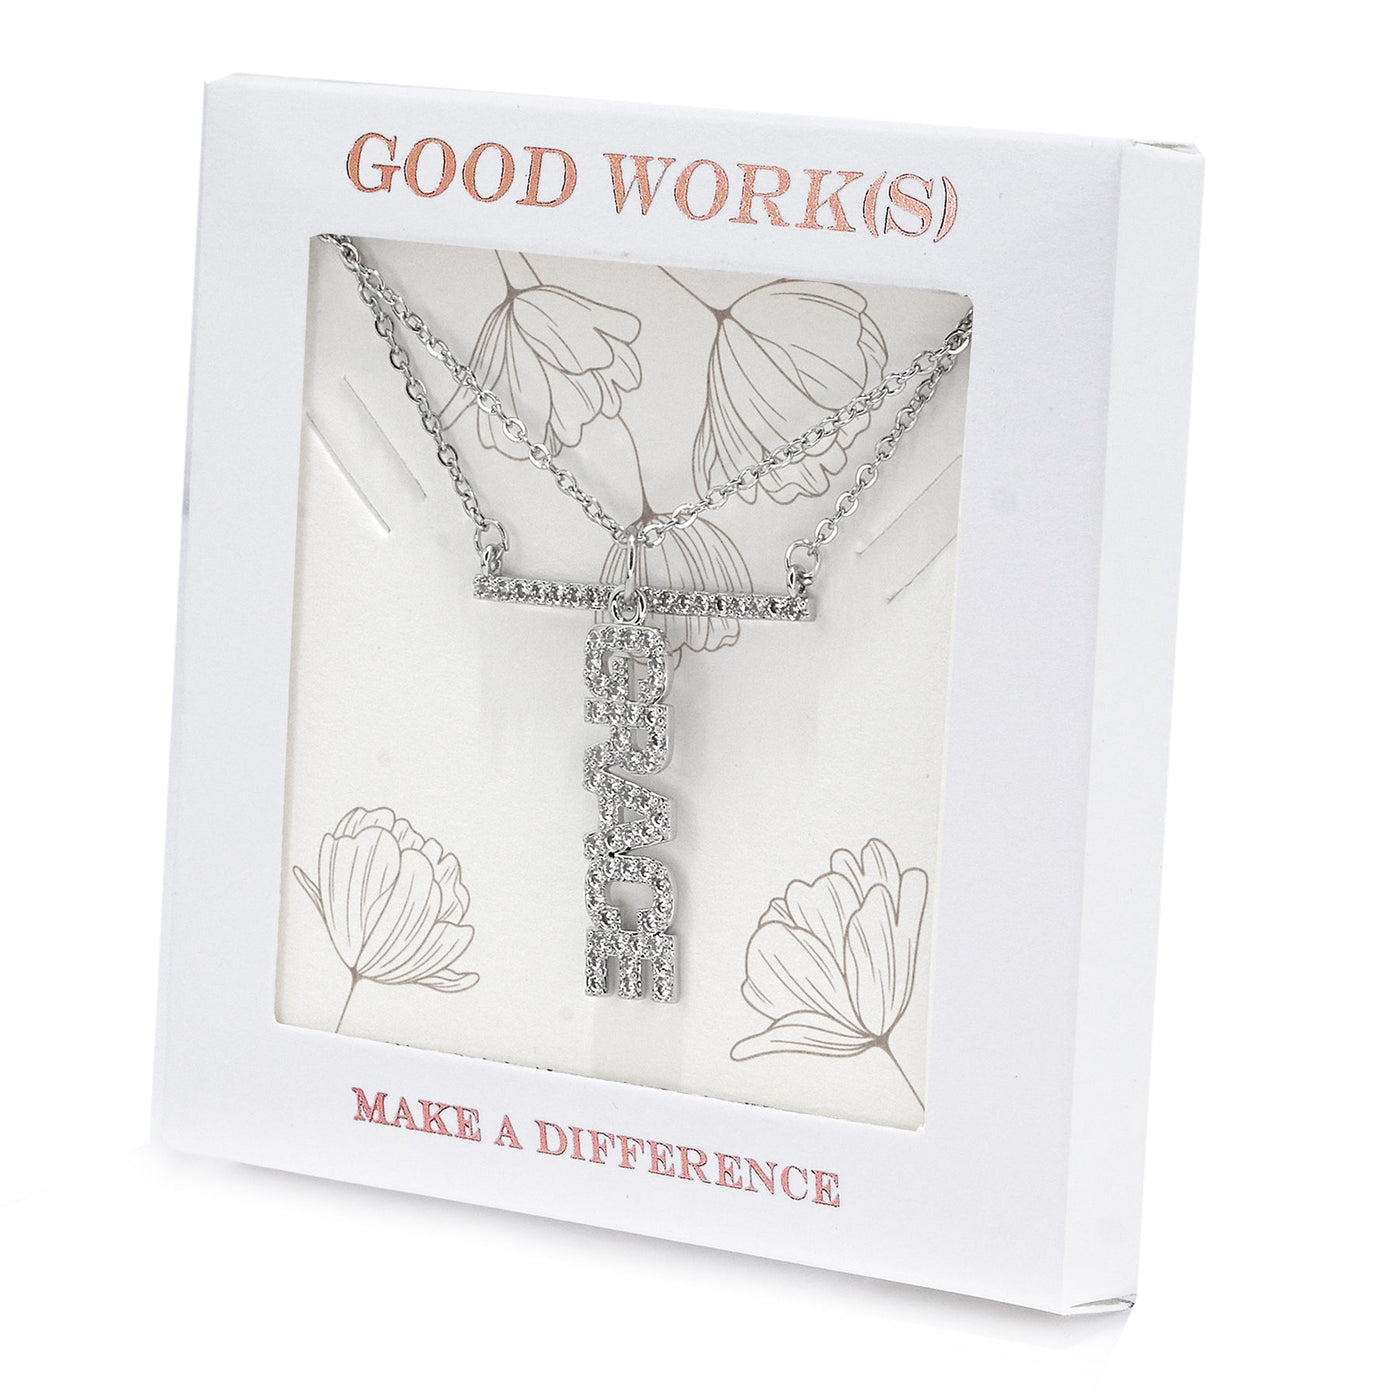 God's Grace Necklace-Good Work(s) Make A Difference® | Christian and Inspirational Jewelry Company in Vernon, California